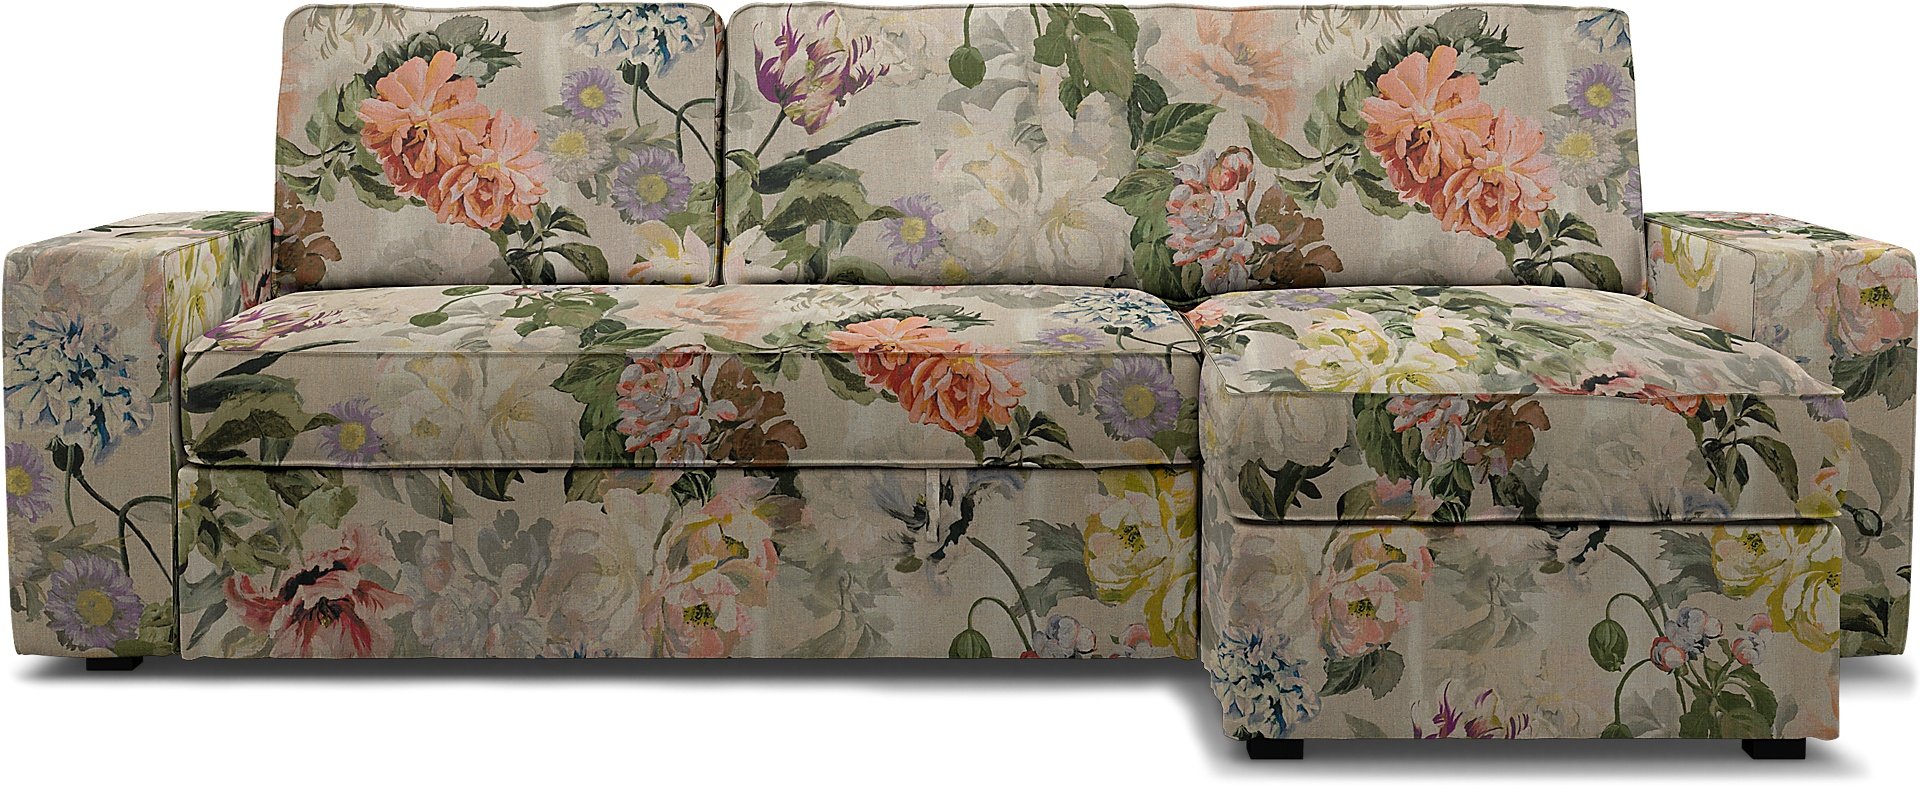 IKEA - Vilasund sofa bed with chaise cover, Delft Flower - Tuberose, Linen - Bemz